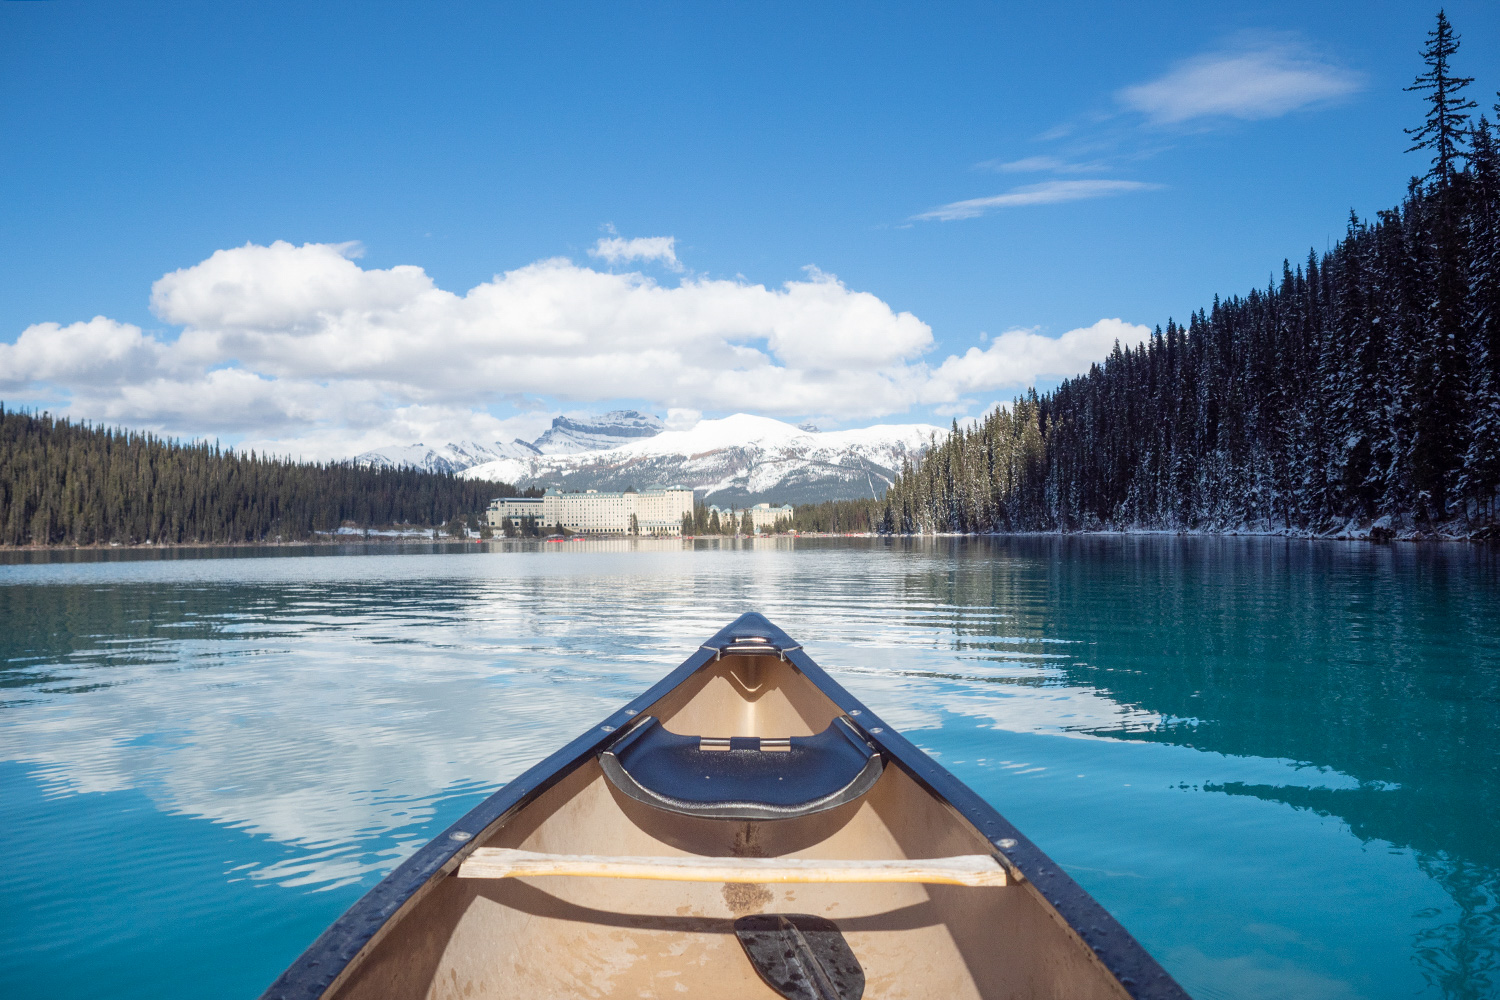 Photographing from a Canoe on Lake Louise, Canada 